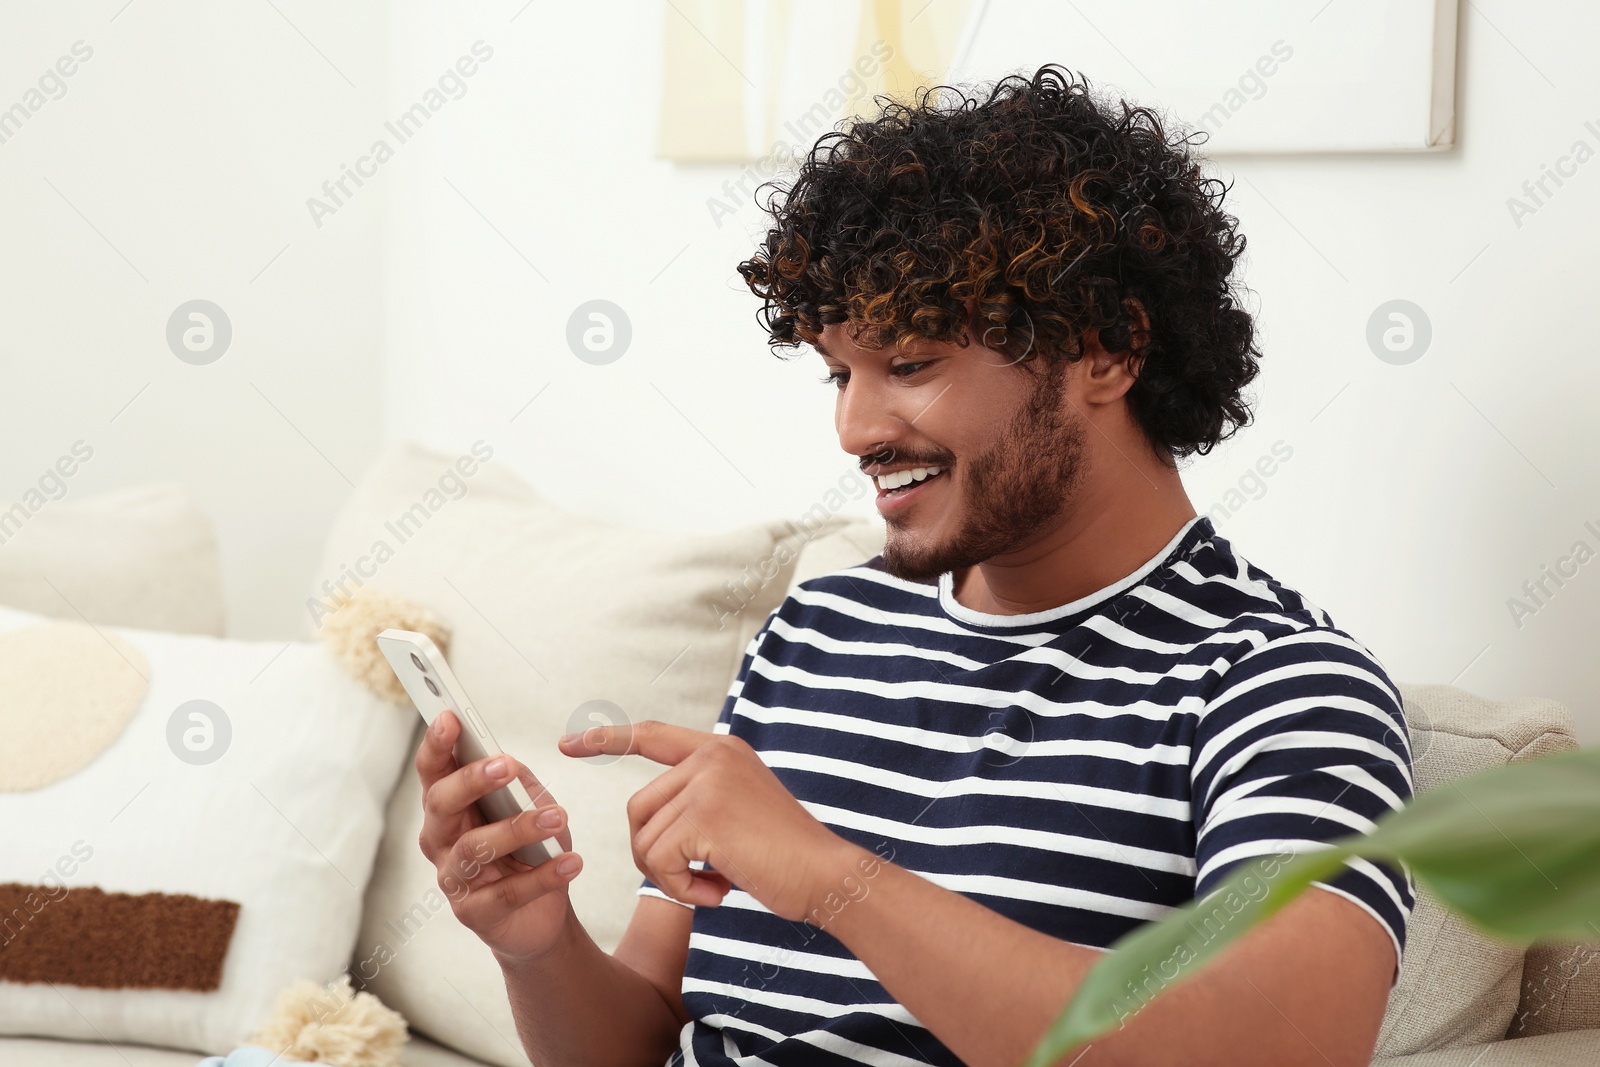 Photo of Handsome smiling man using smartphone in room, space for text